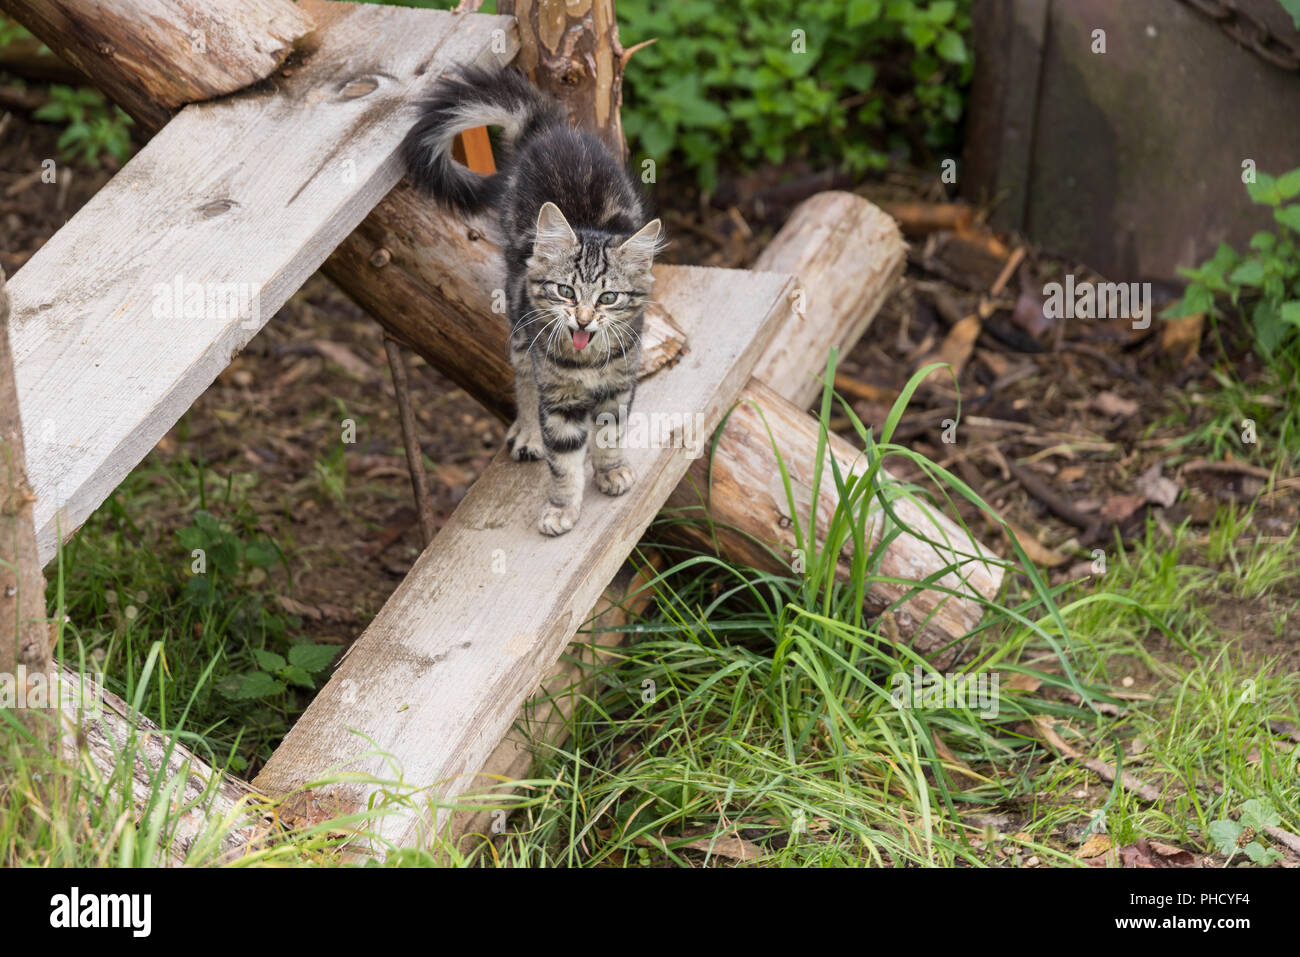 Cats baby stretches and yawns on old wooden staircase outdoor Stock Photo